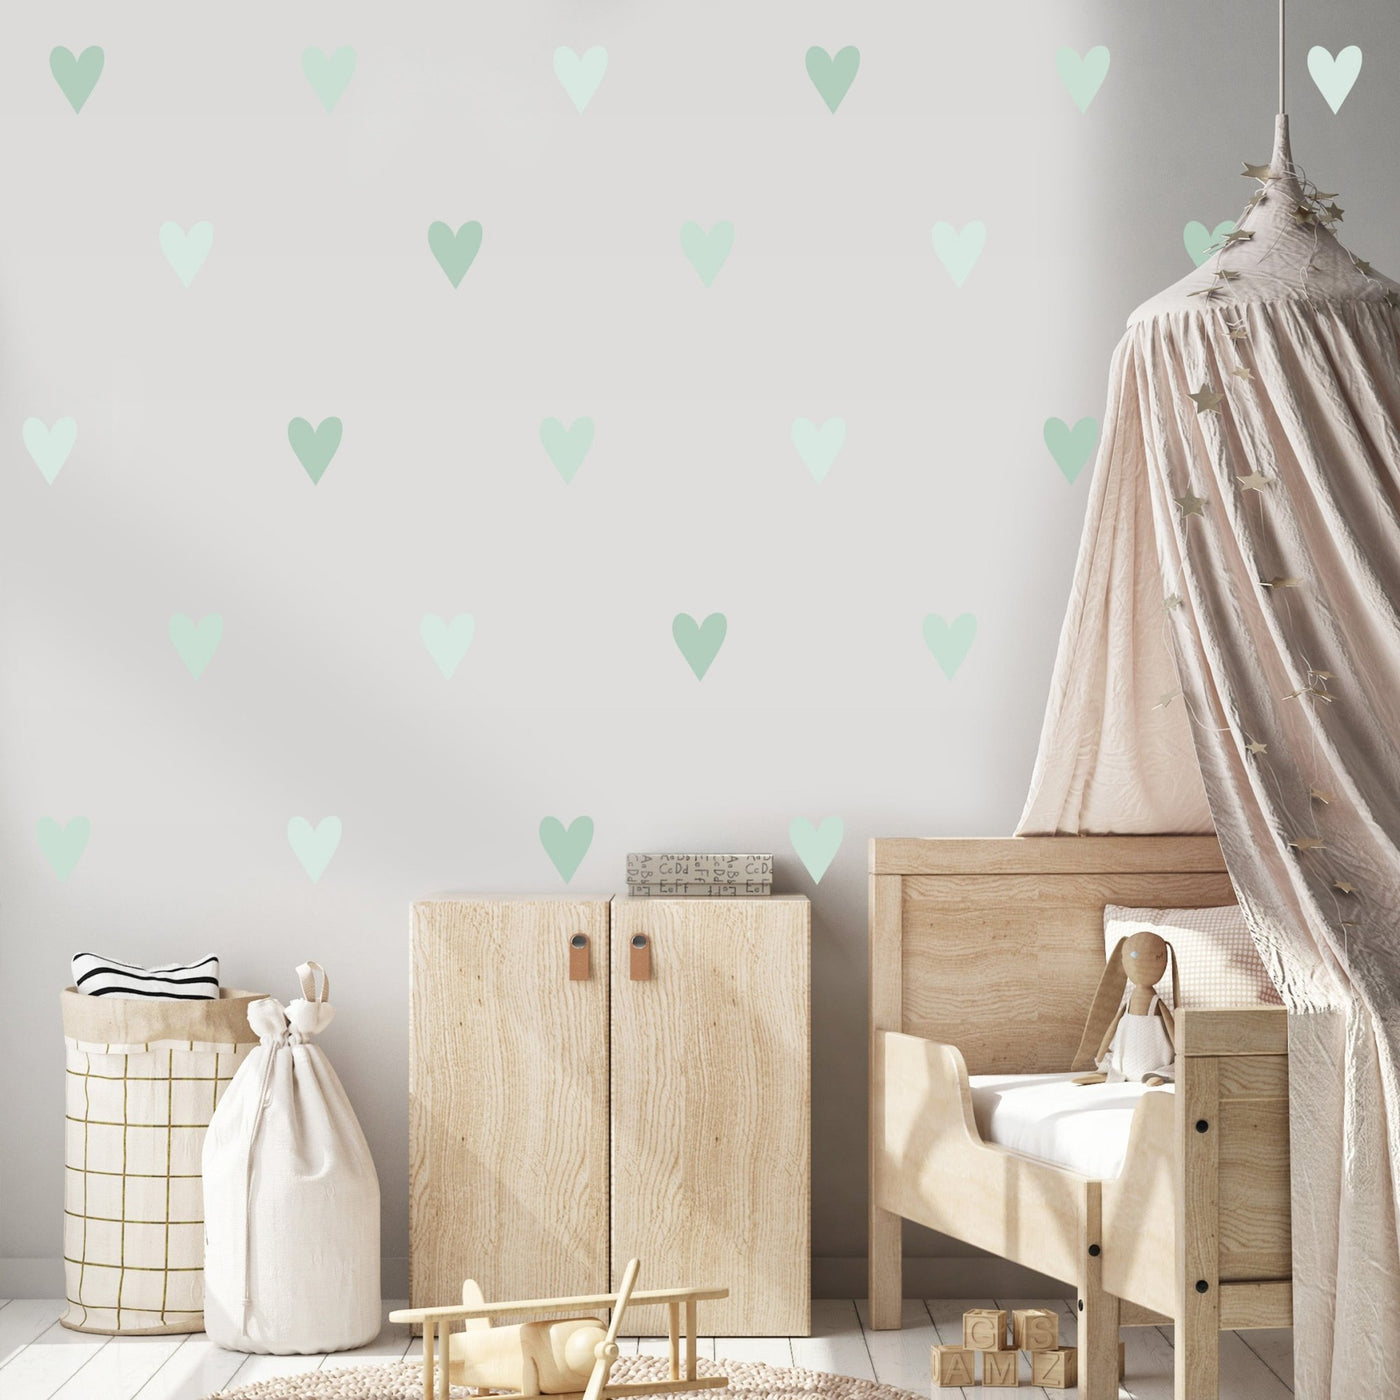 Soft Green Heart Wall Stickers - Jack Harry and Ollie